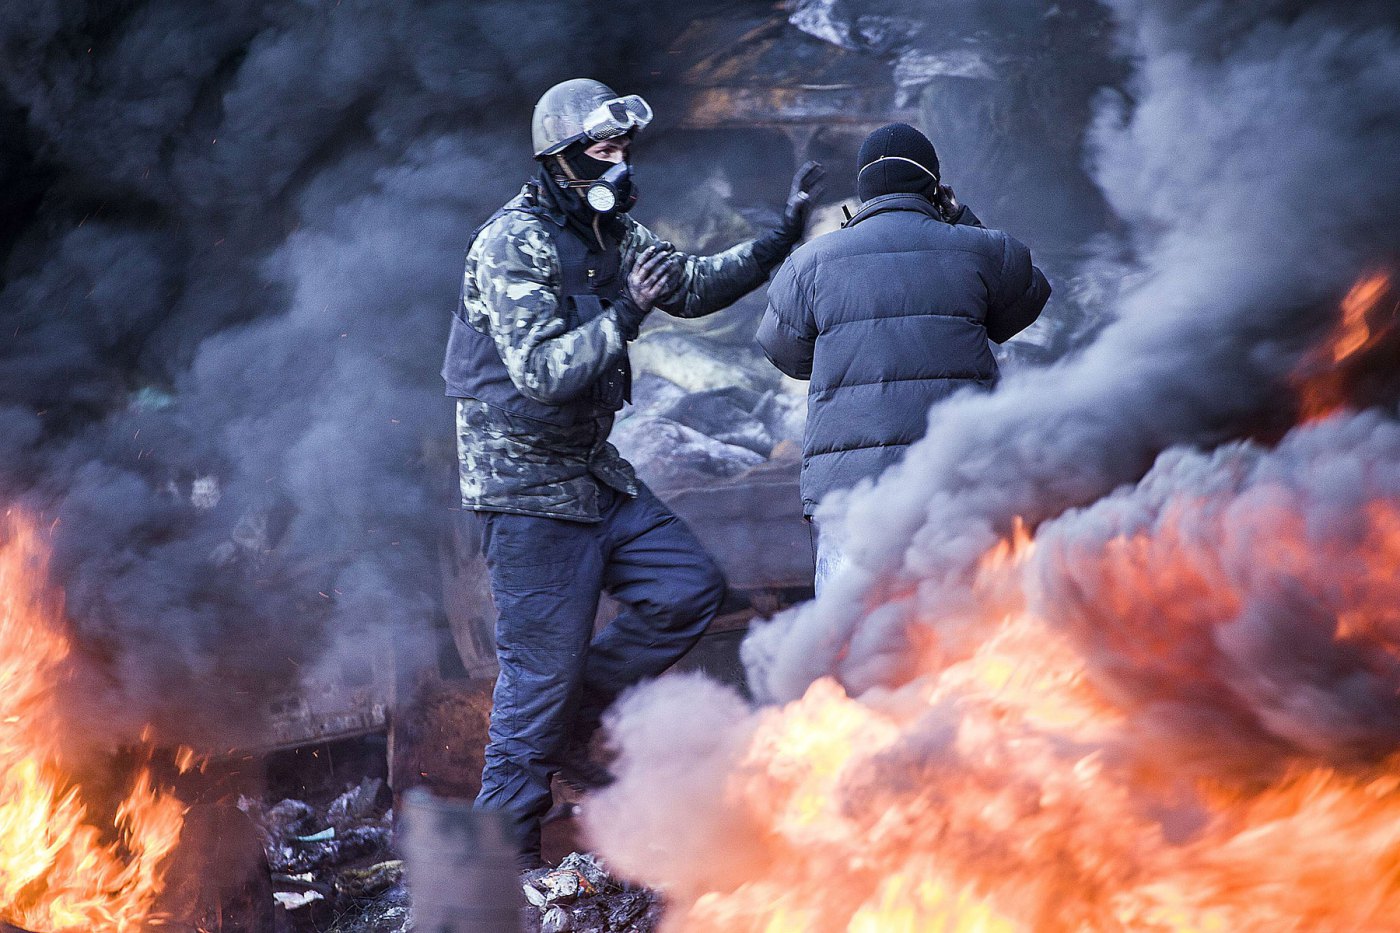 Anti-government demonstrators stand among the smoke of burning barricades during clashes with riot police in Kiev, February 18, 2014.